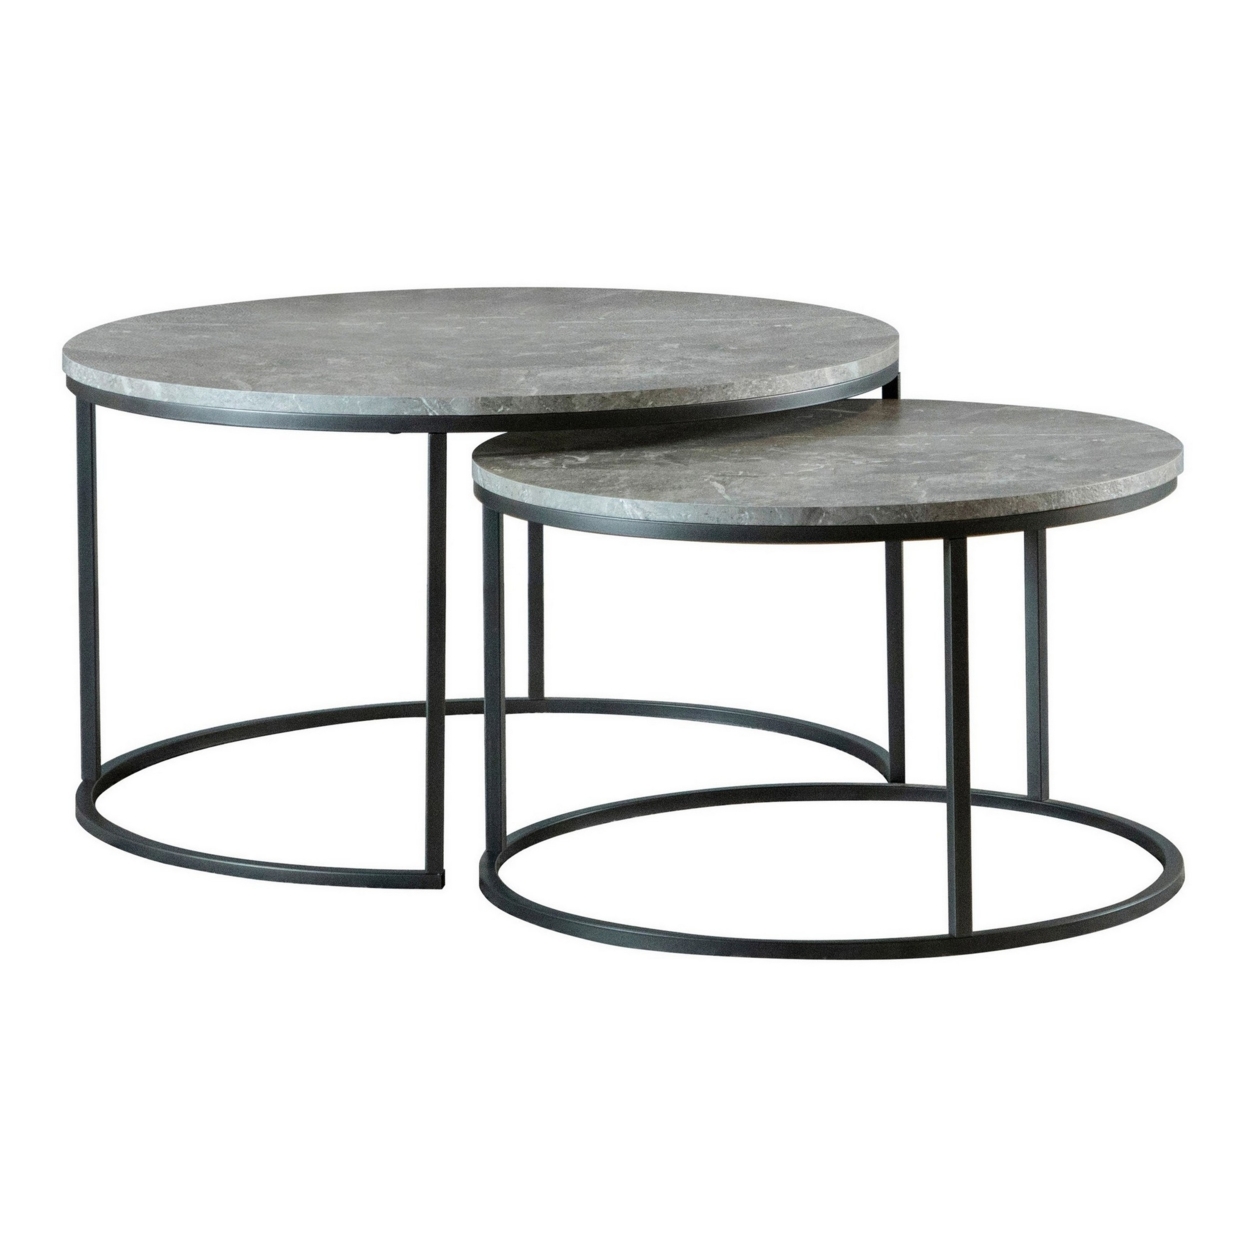 35 Inch 2 Piece Nesting Coffee Table Set, Round Gray Faux Marble Tabletop